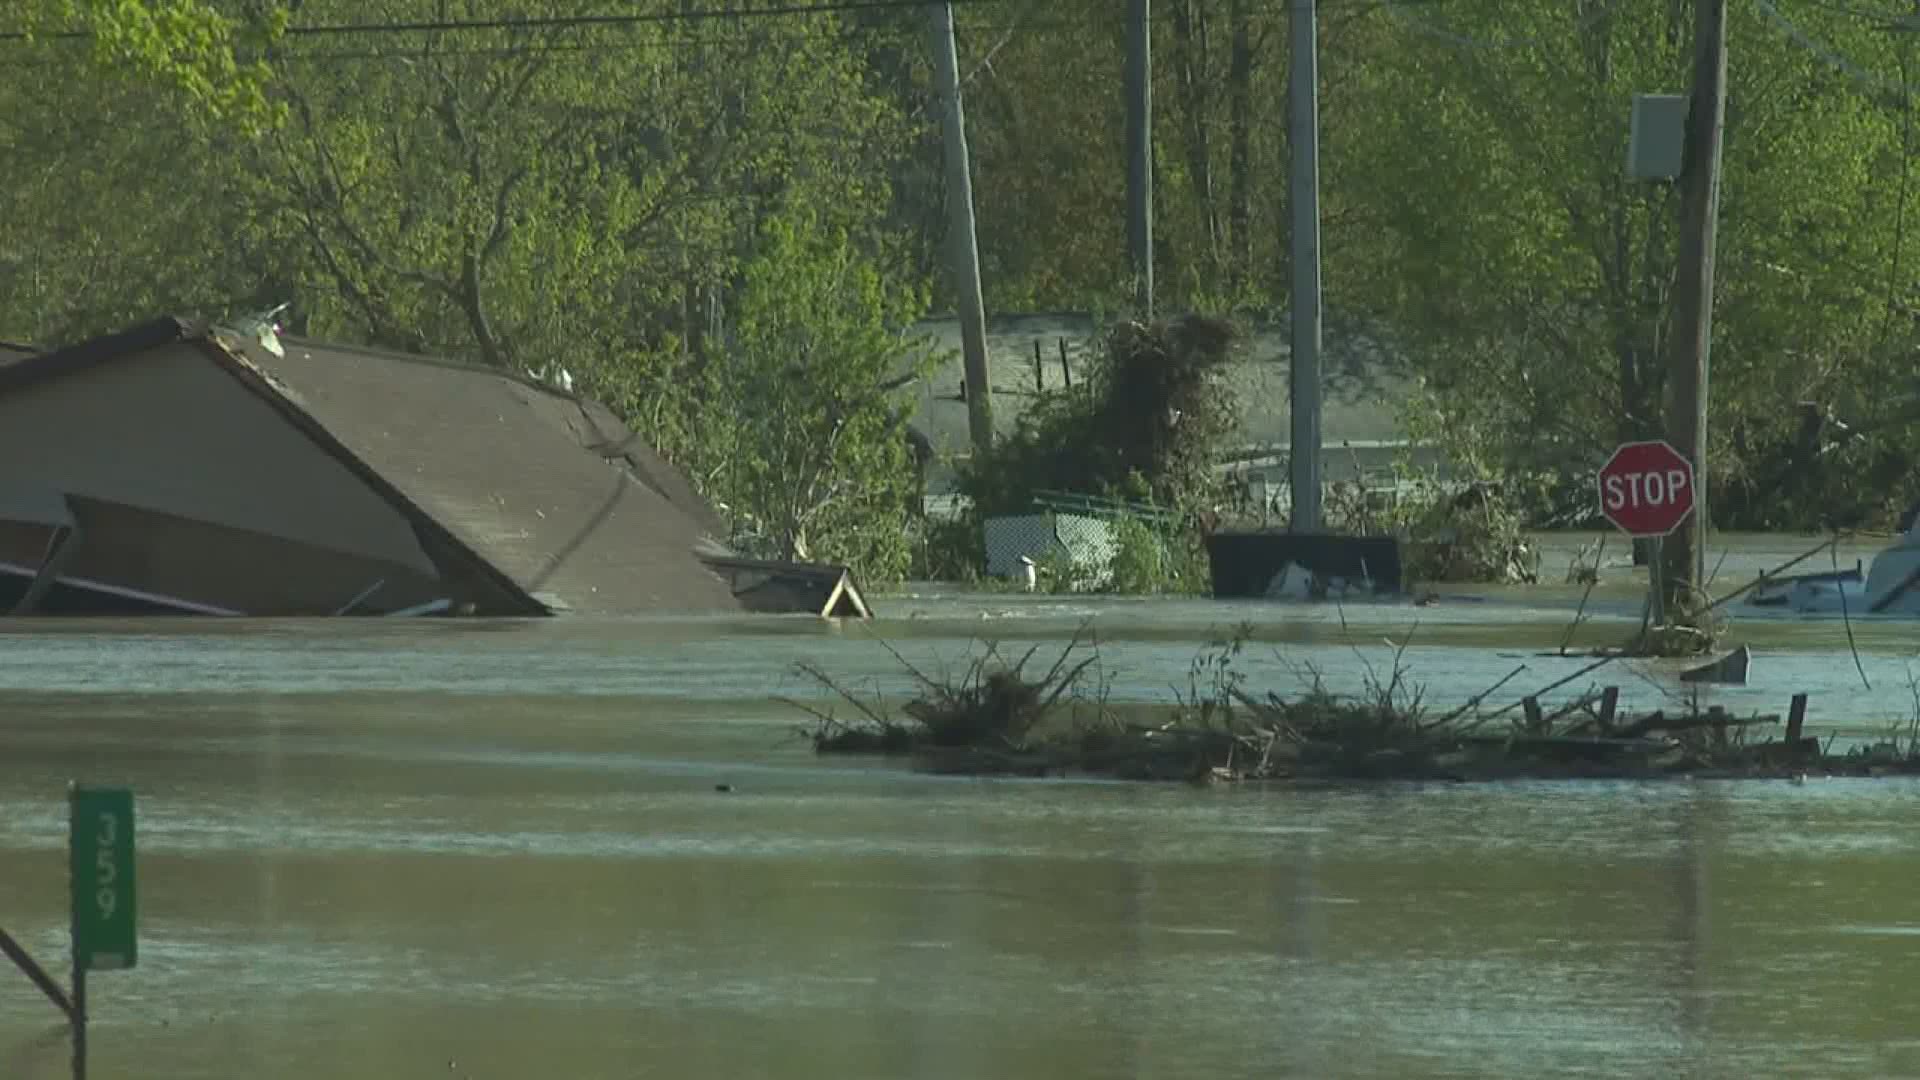 Midland flood displaces thousands, threatens chemical plant. Gov. Whitmer requests federal emergency declaration to aid in flood response.